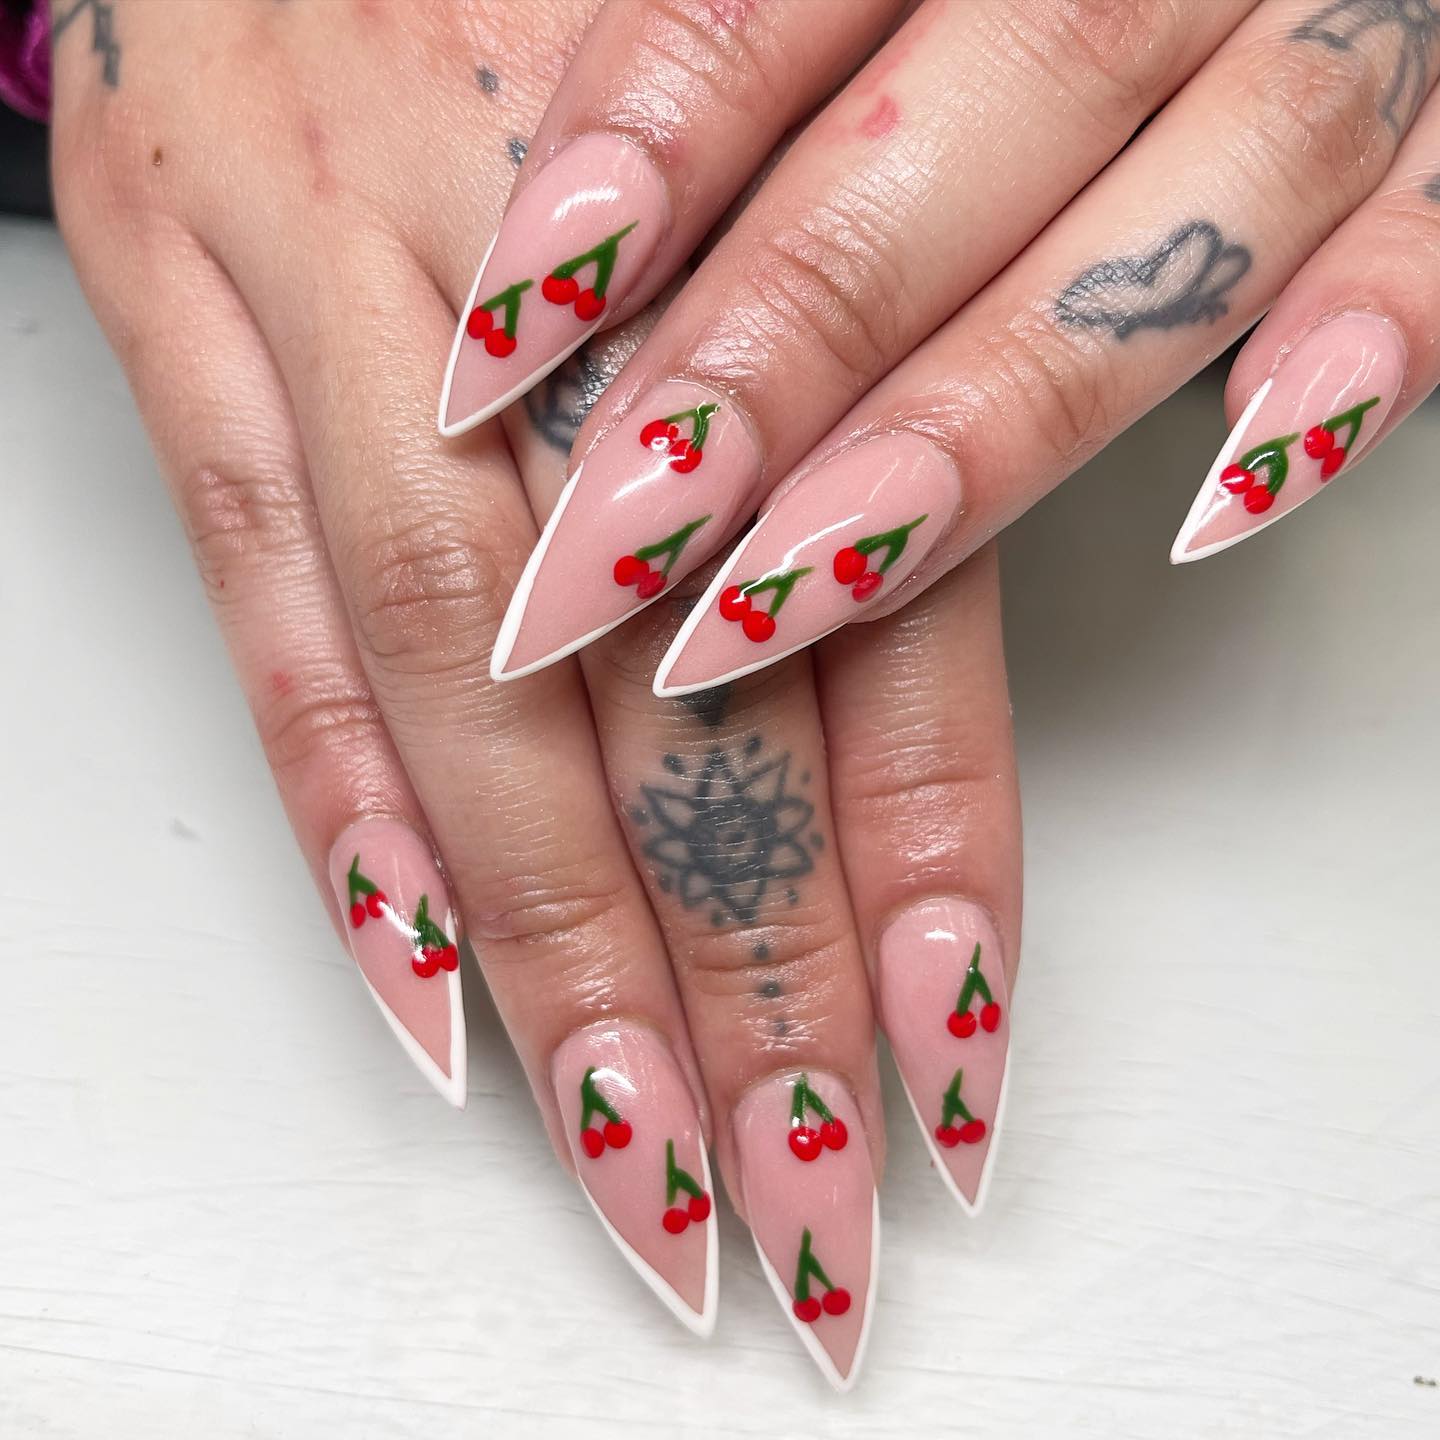 Cherries have always been a perfect choice for nail arts. So, why not using them on your stiletto nails? Classic French tips are plus.